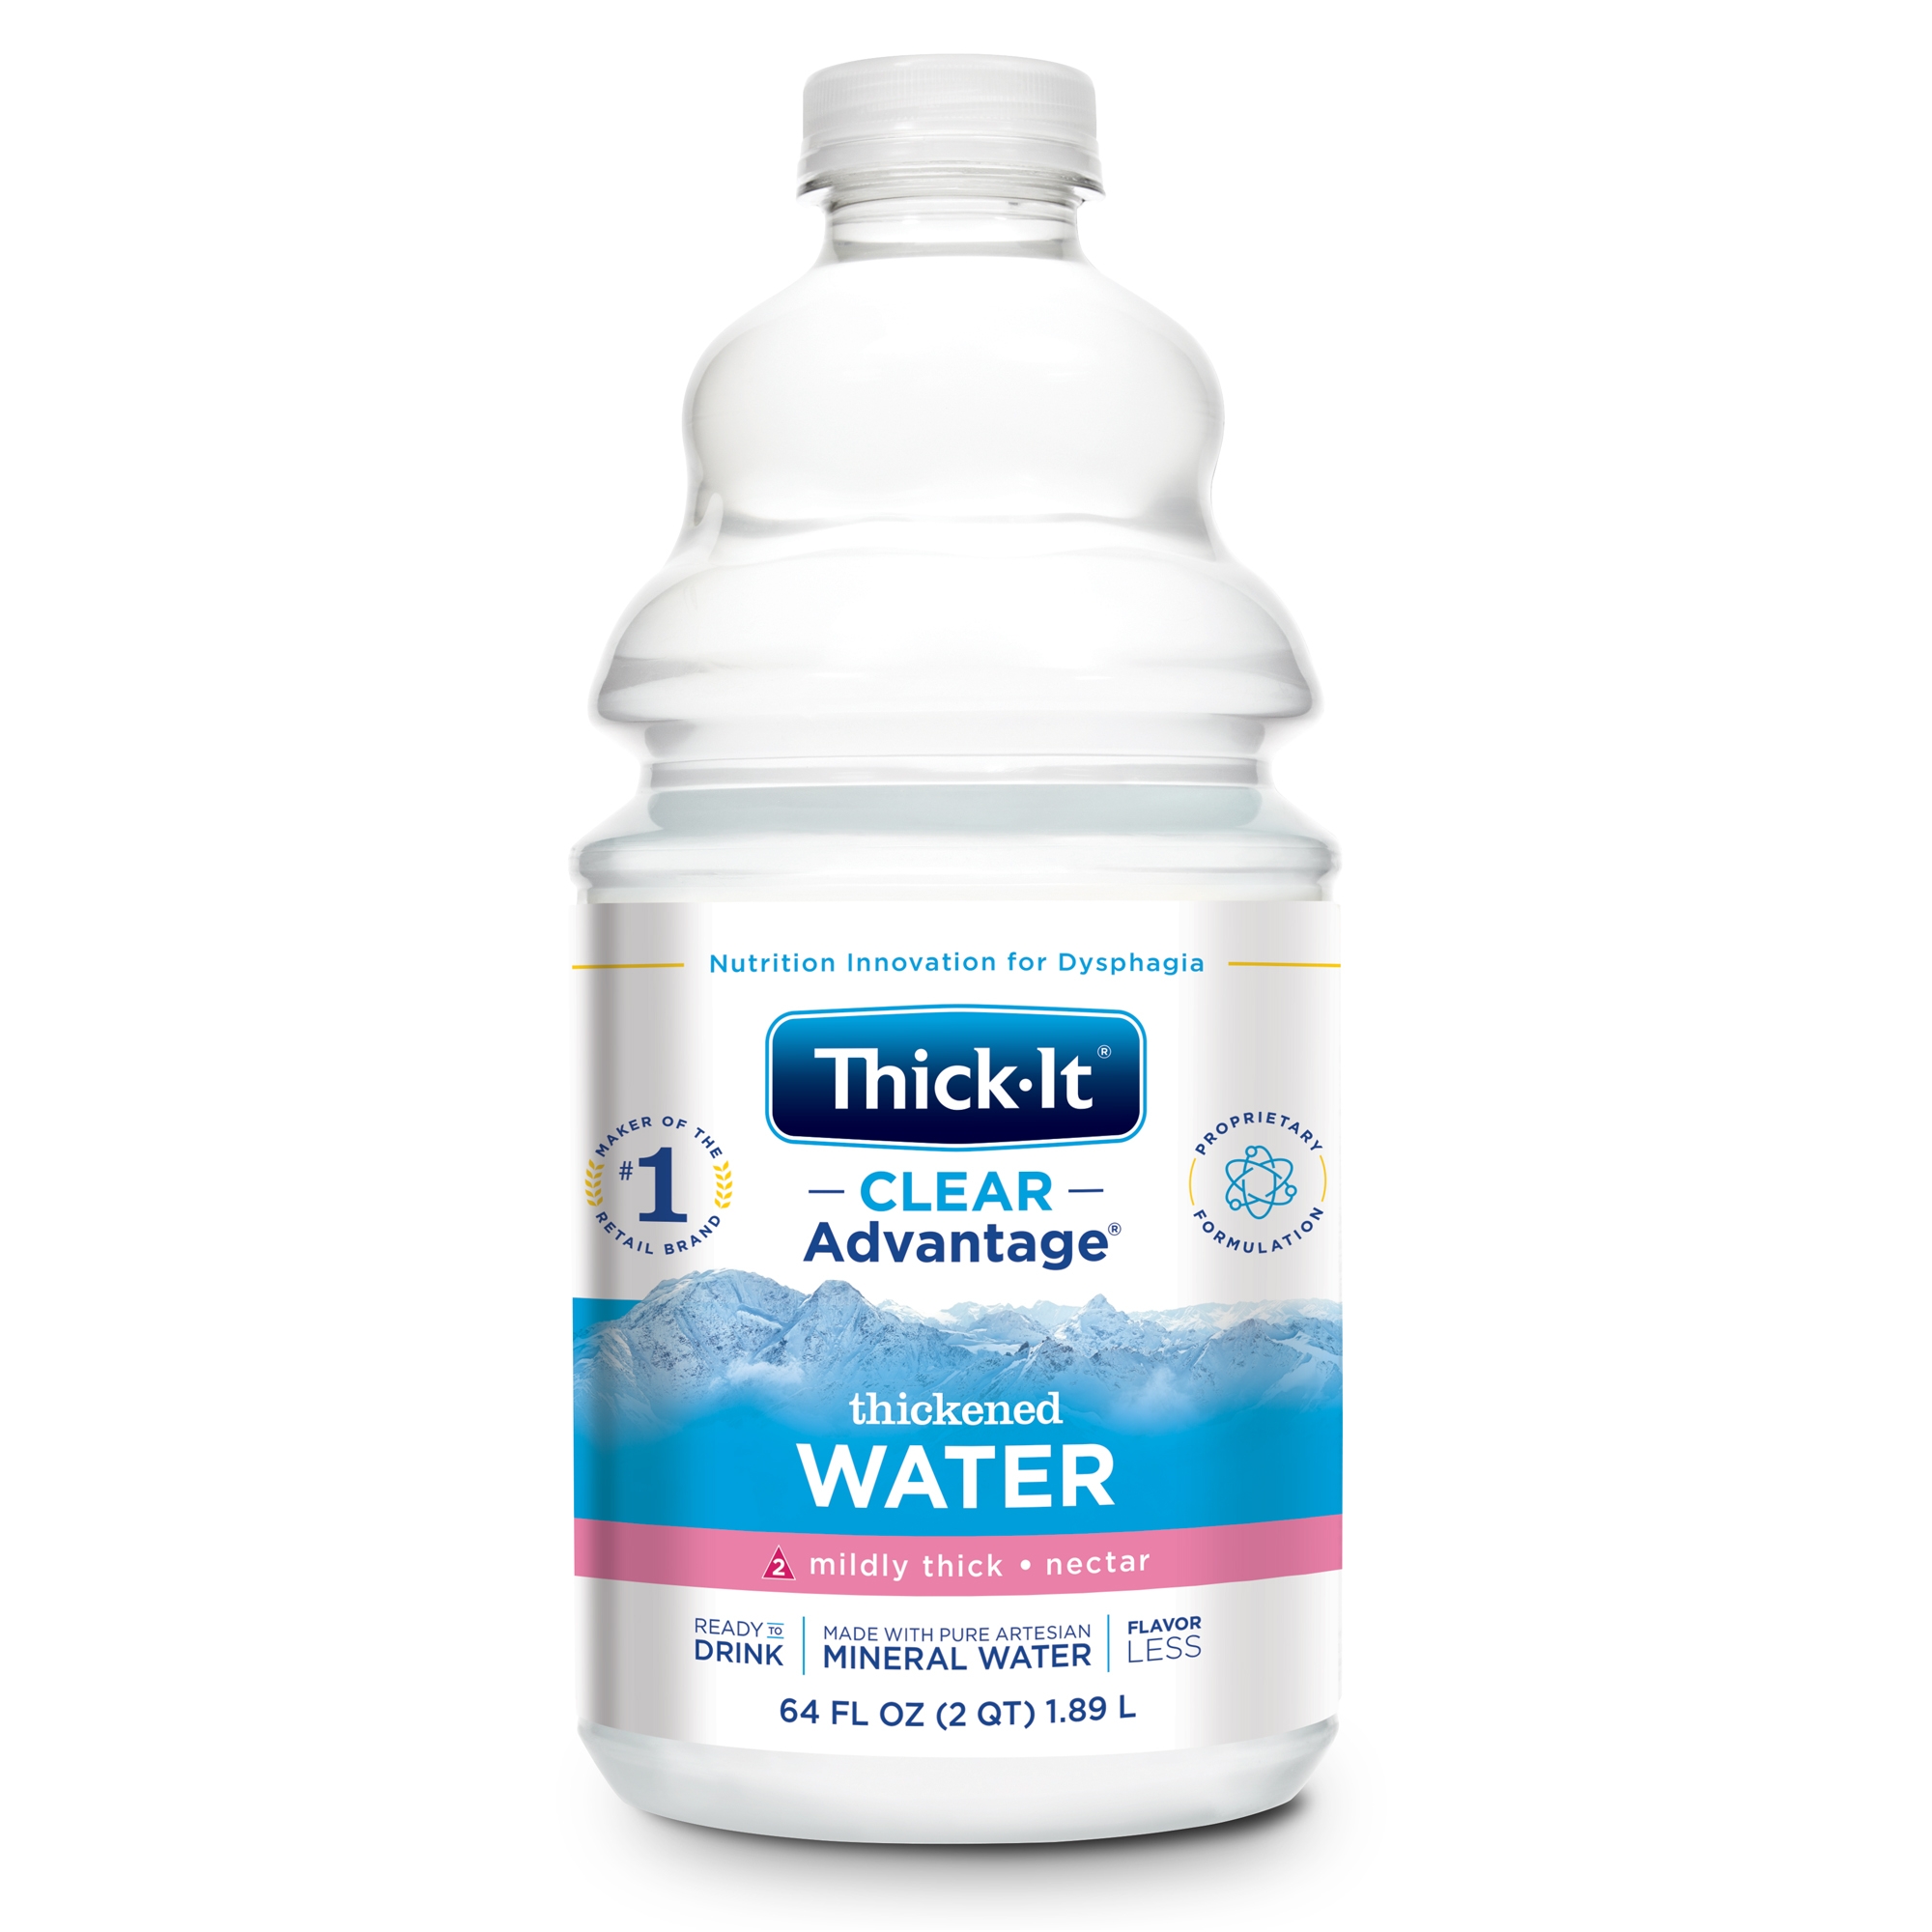 Thick-It Clear Advantage Thickened Water Unflavored 8 oz Bottle, 1 ct -  Foods Co.